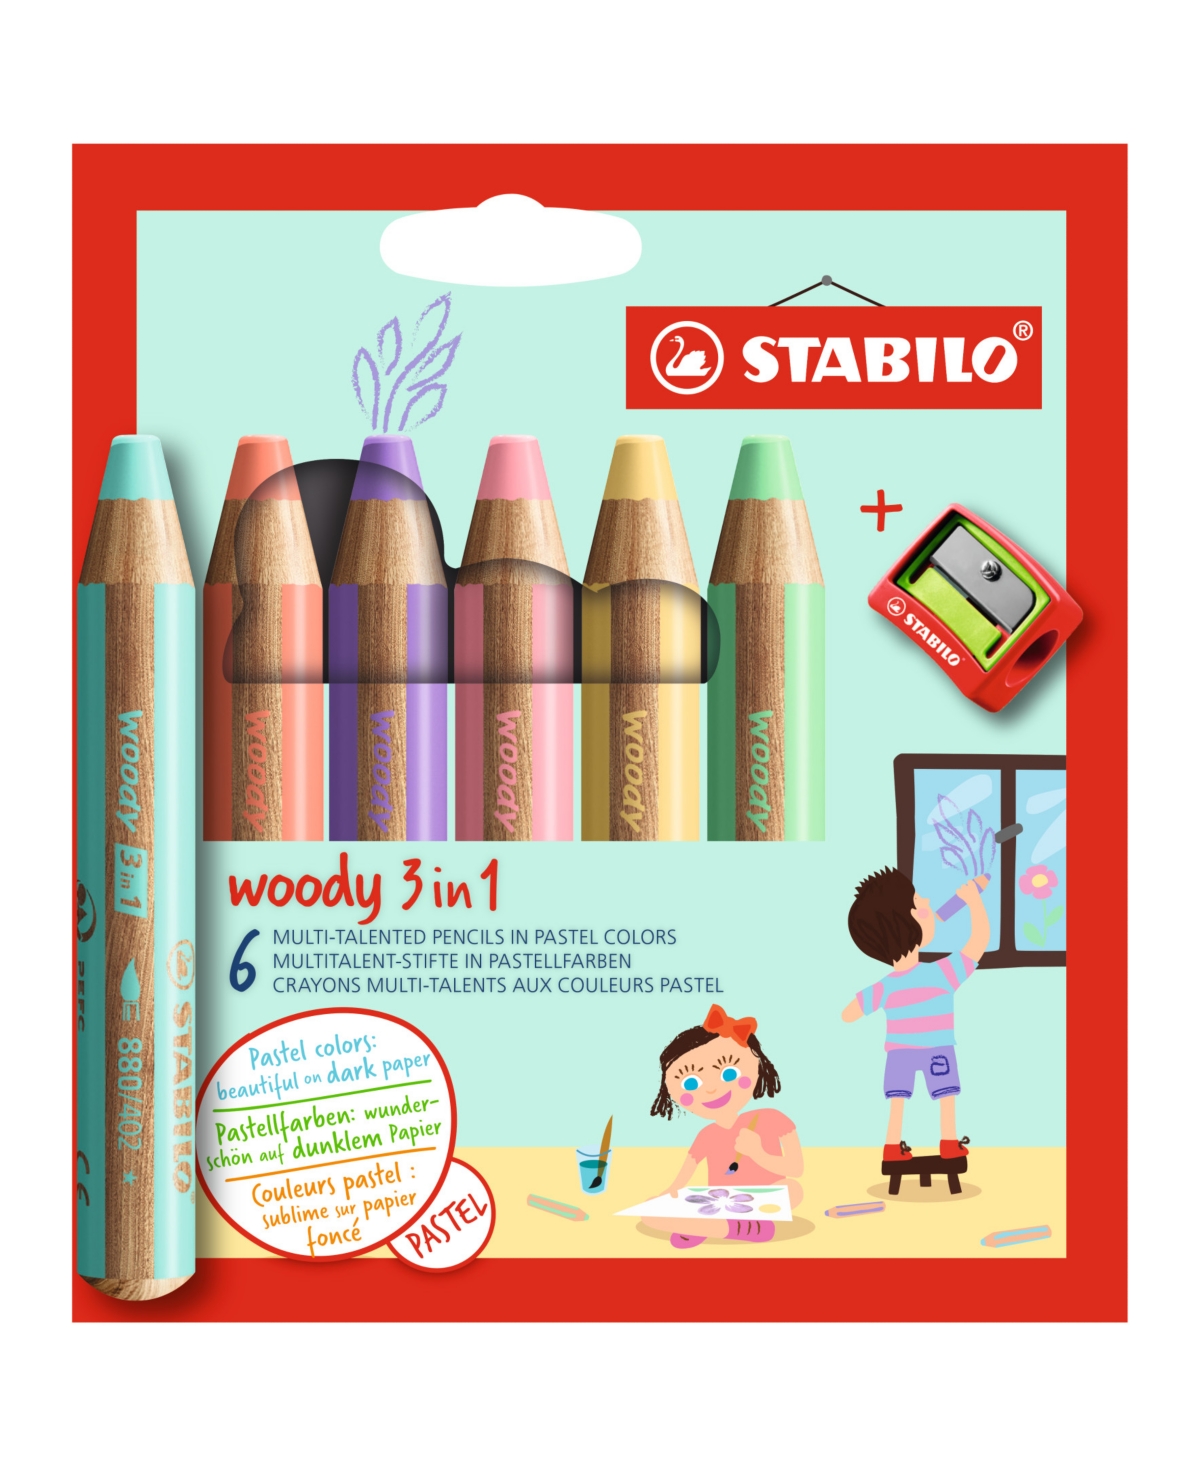 Woody 3 in 1 with Sharpener 7 Piece Color Pastel Set - Multi